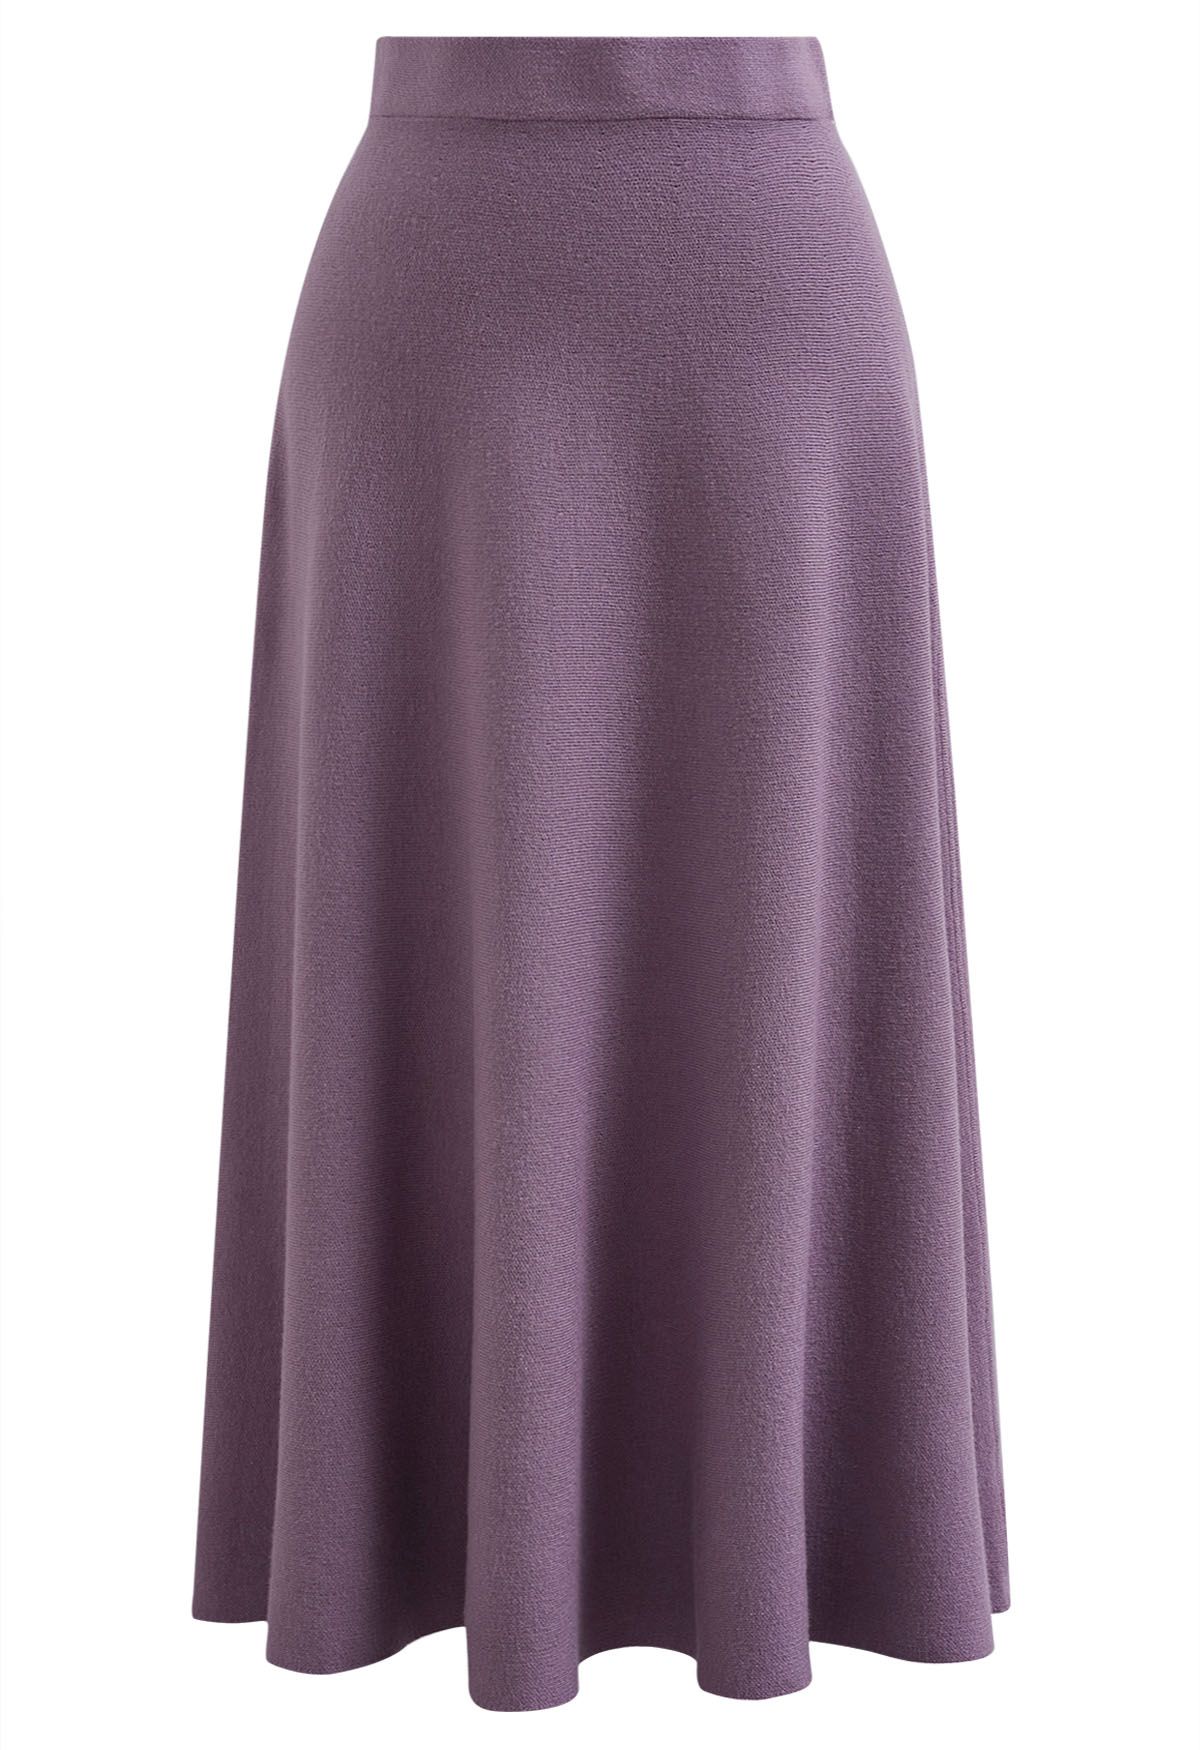 Solid Color A-Line Knit Midi Skirt in Lilac